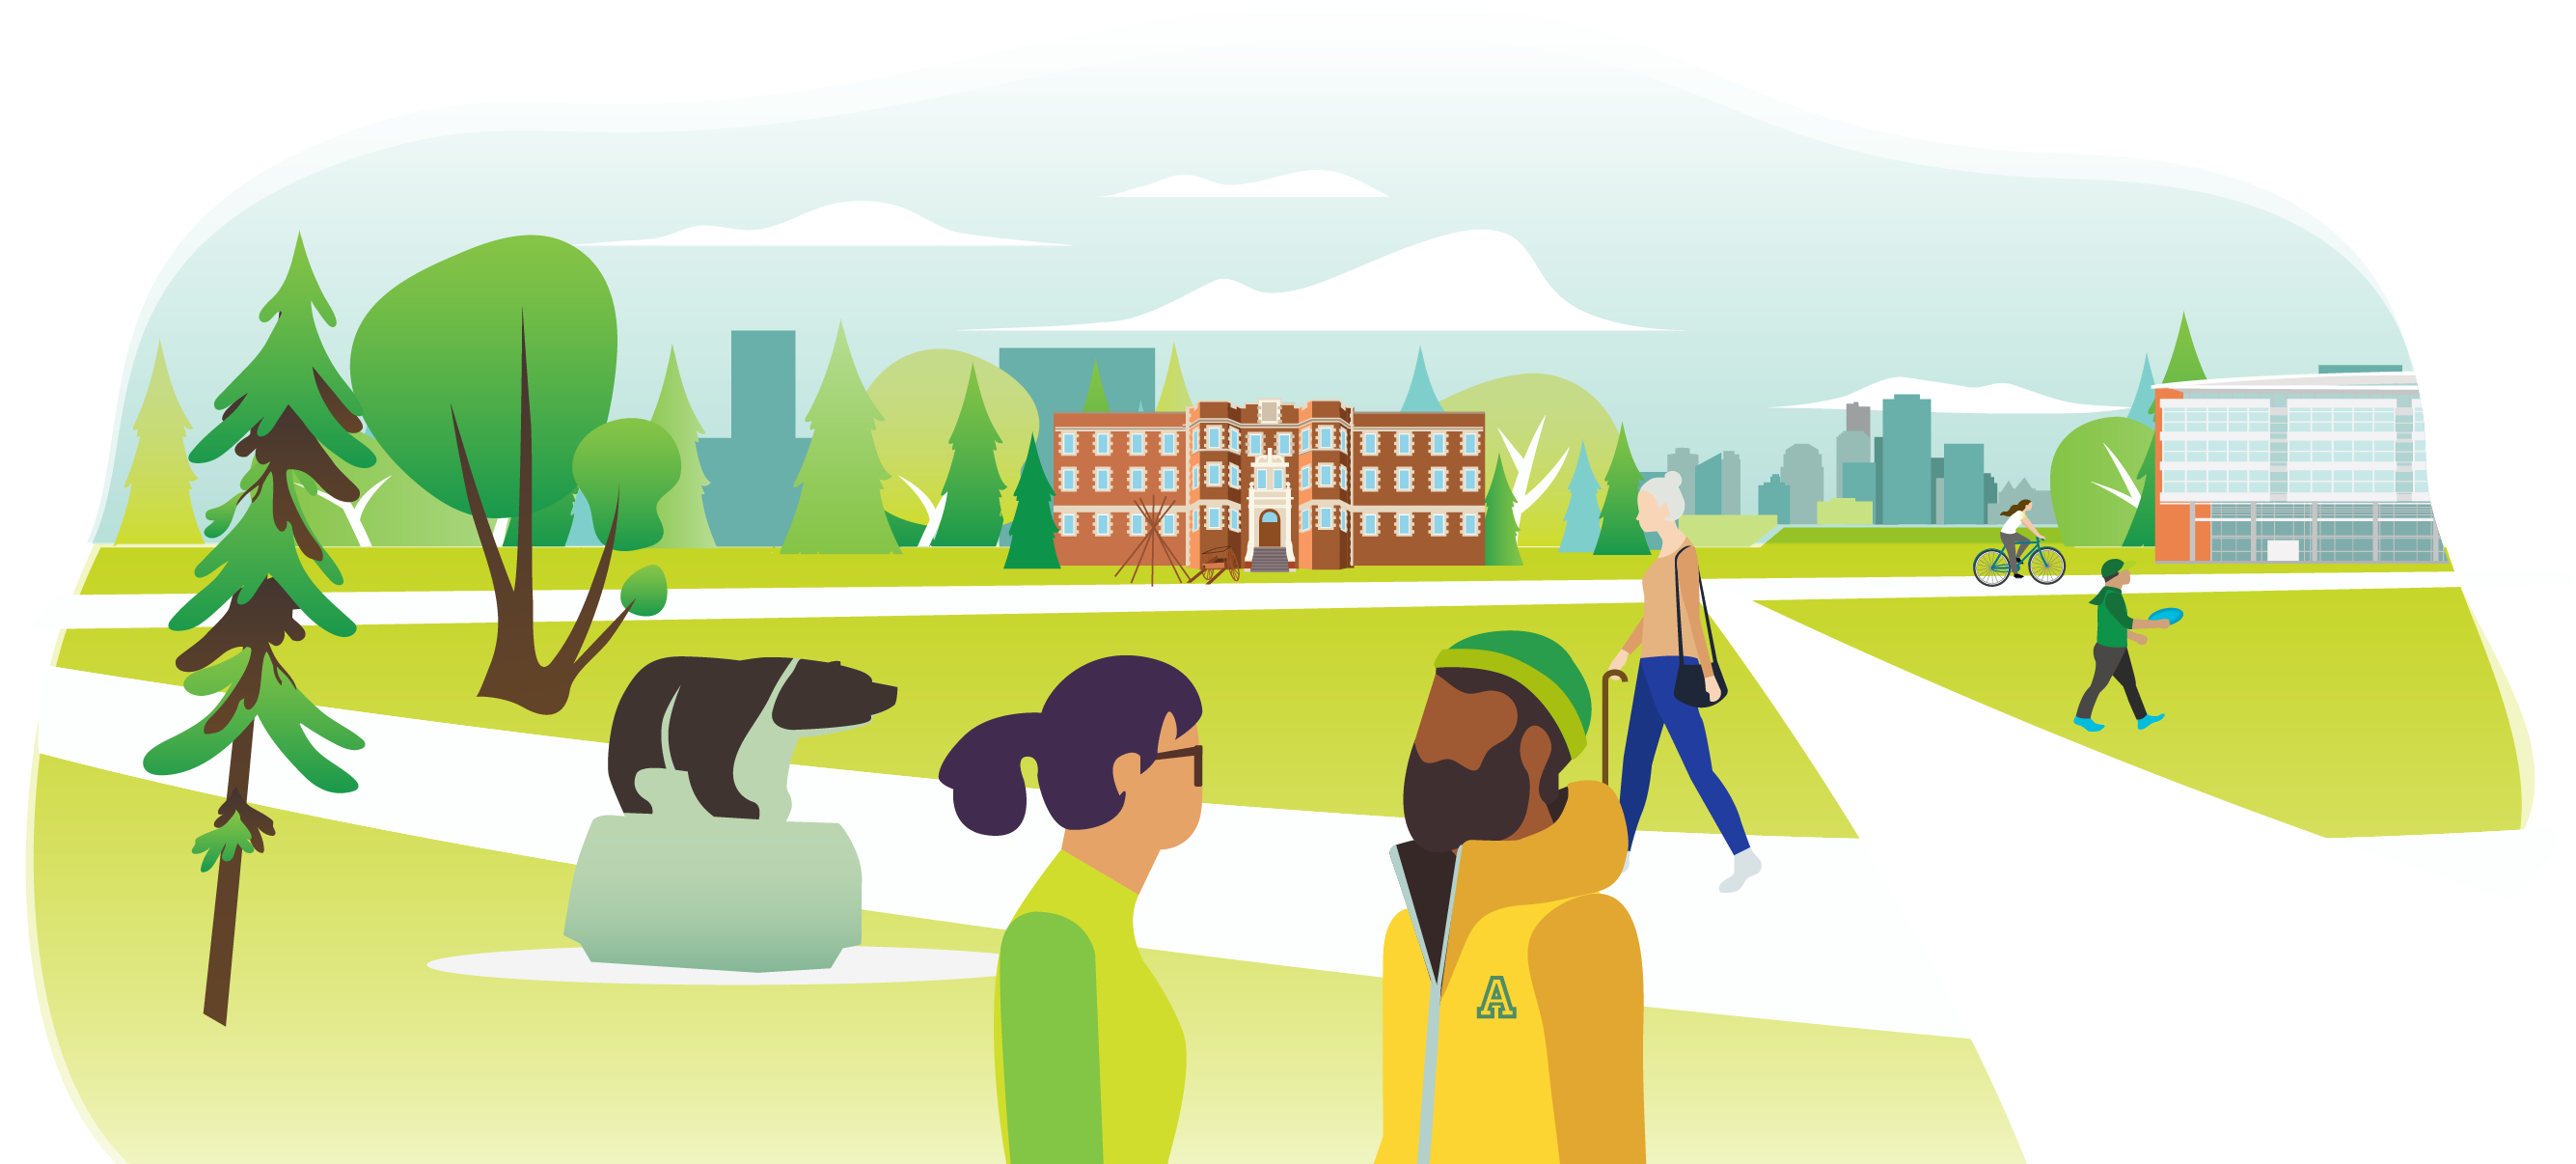 Illustration of people meeting, walking, cycling, and tossing a disc on North Campus Quad.